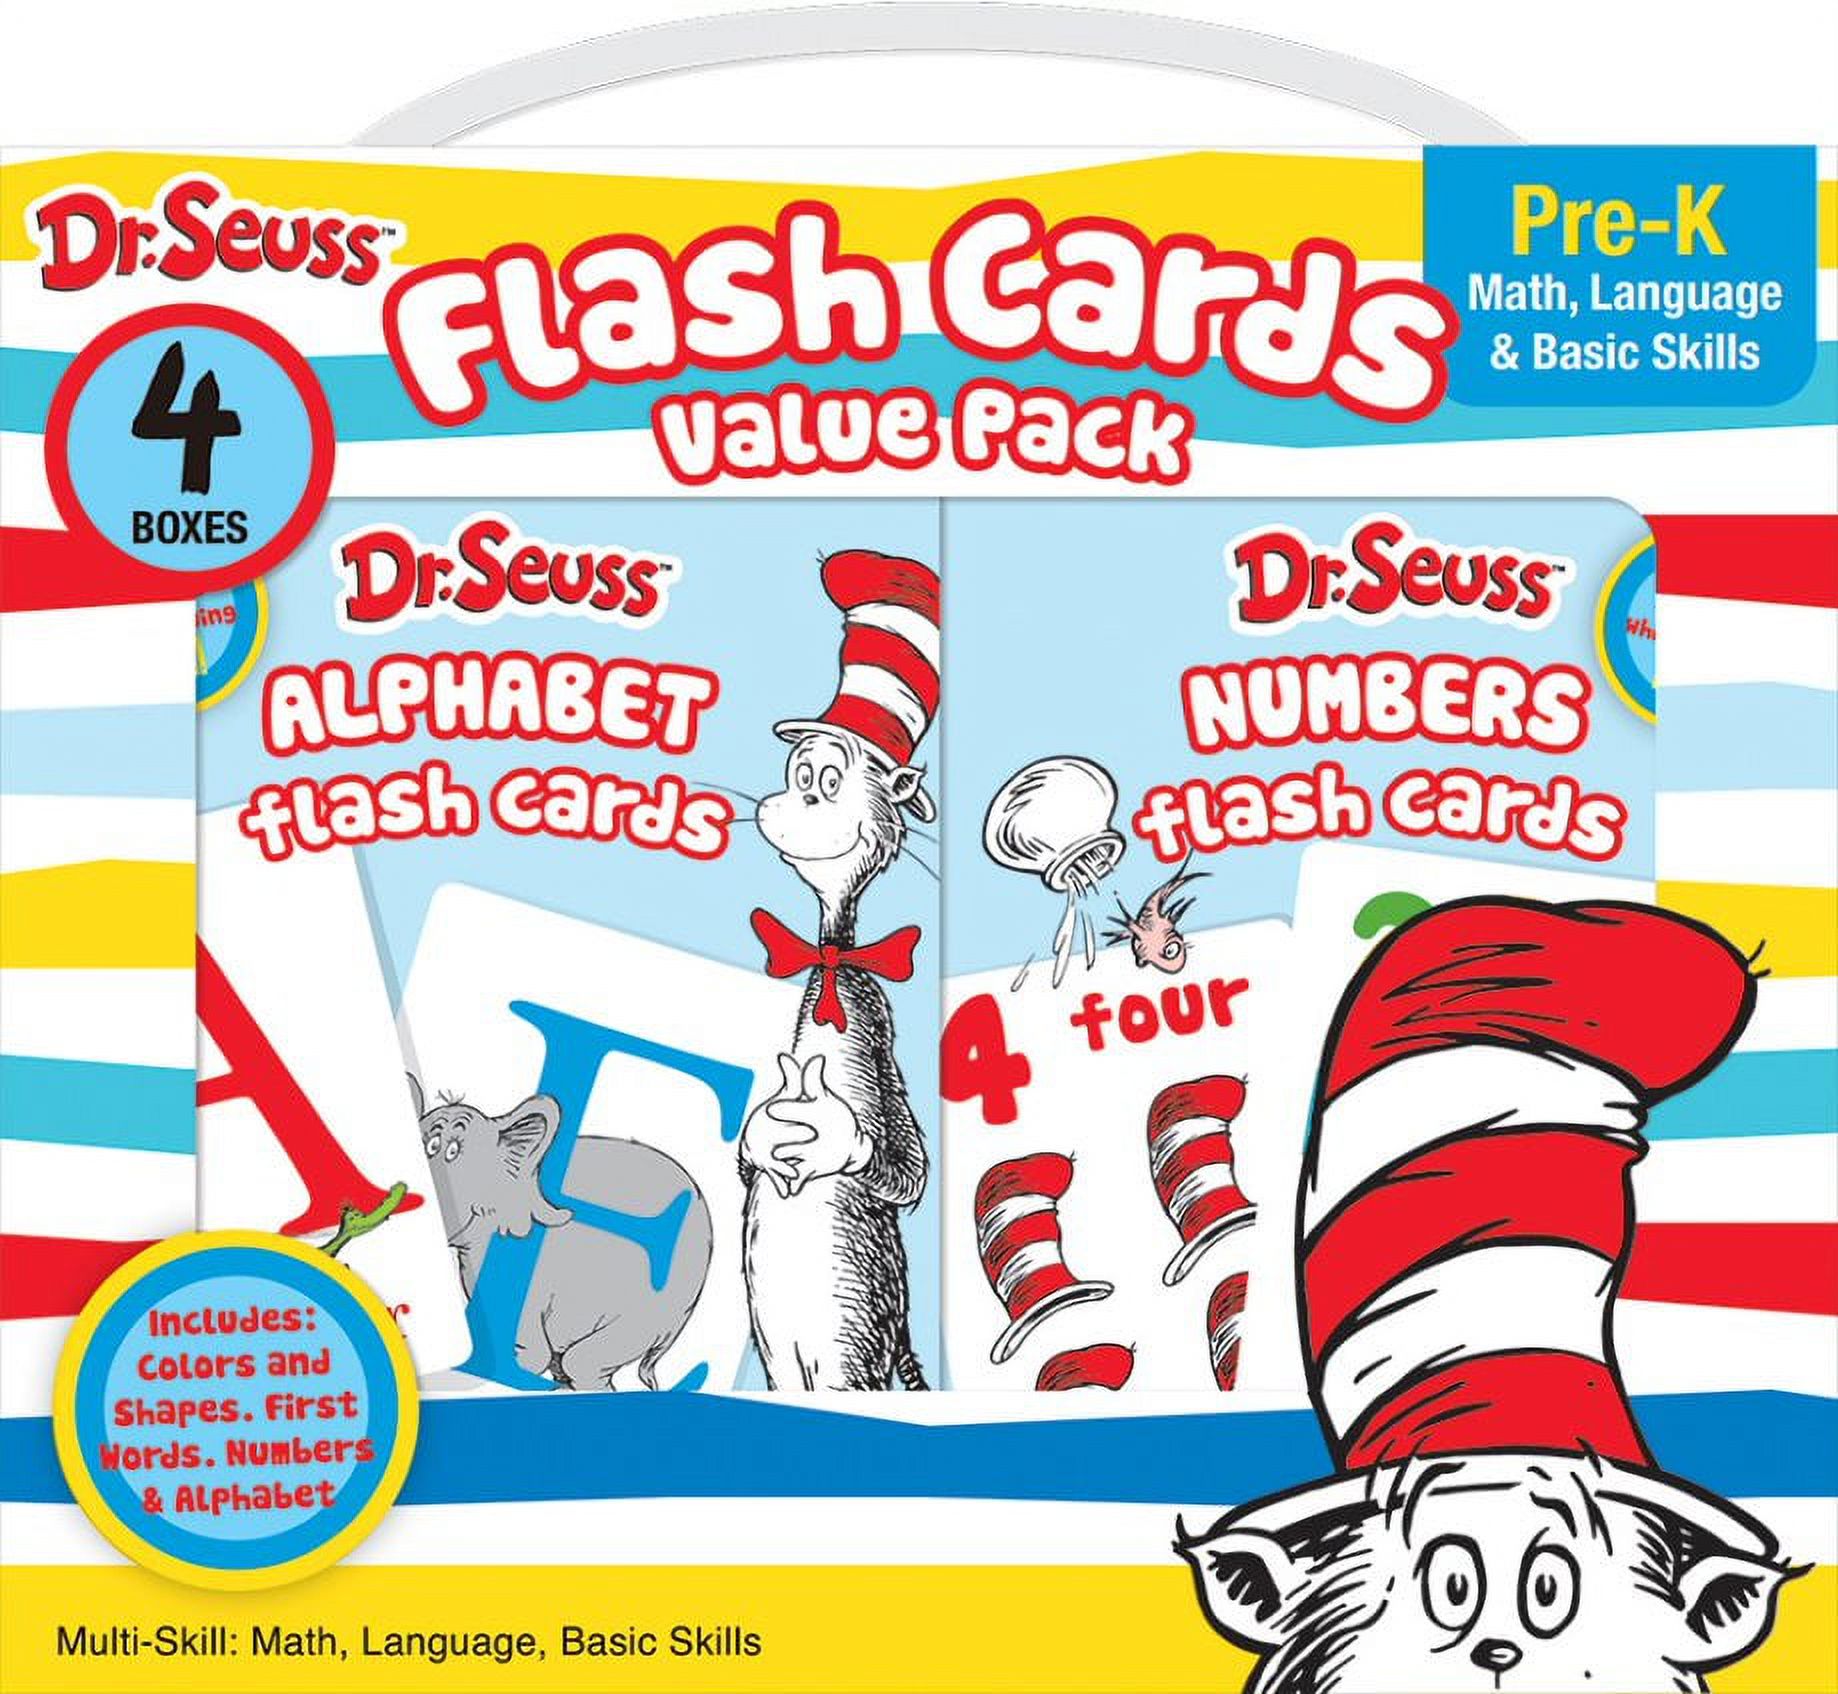 Dr. Seuss 4-in-1 Educational Flash Cards Value Pack - image 1 of 4